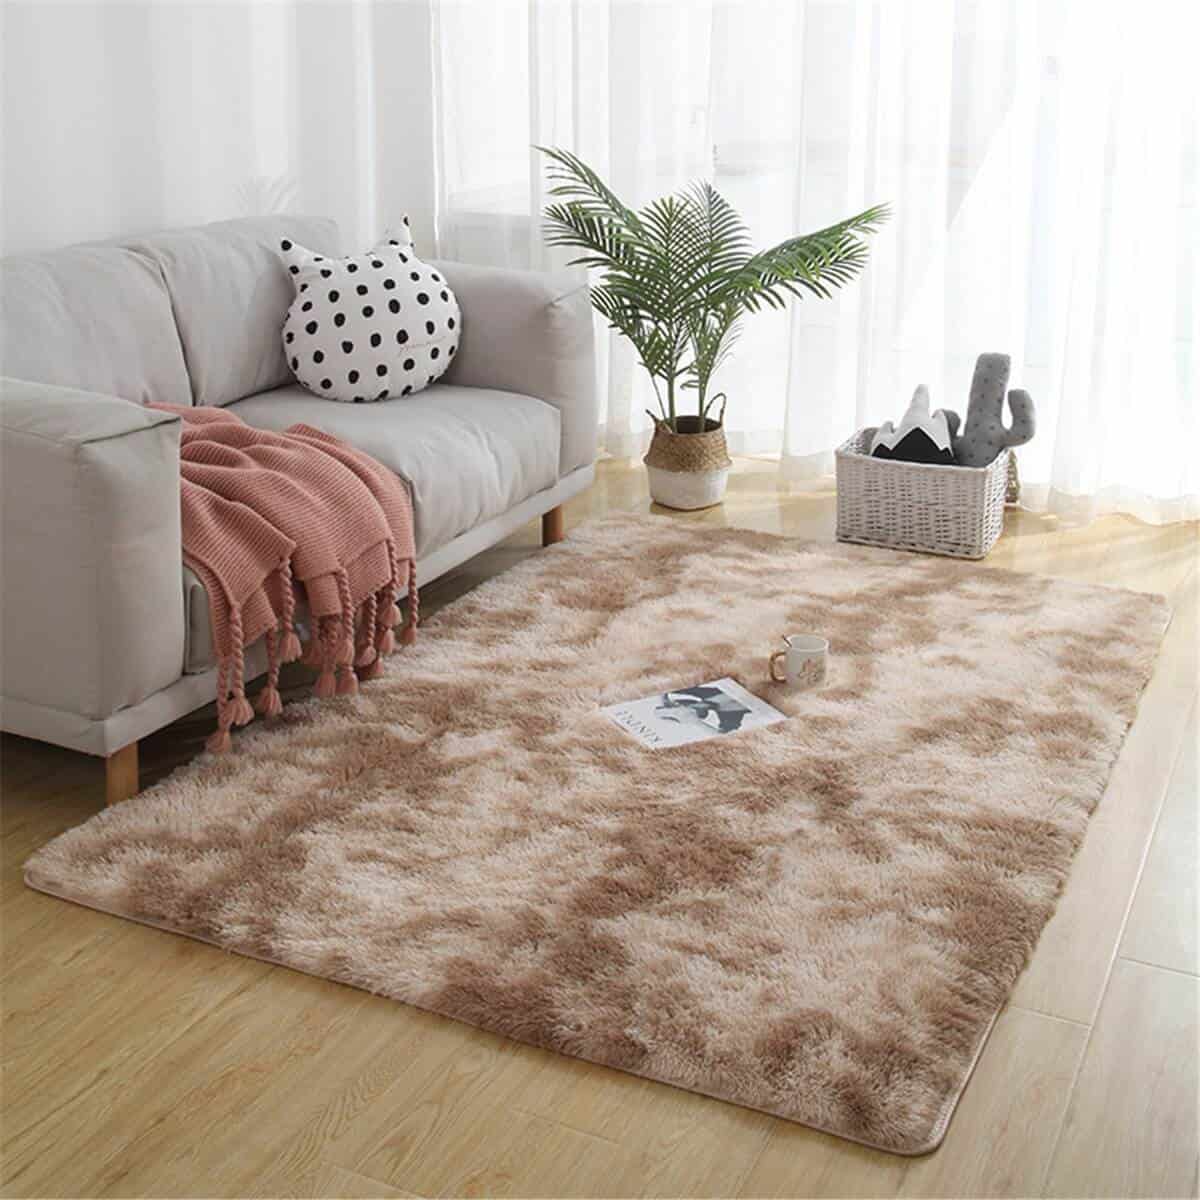 comfy cozy rug in brown earthy tone with a white sofa